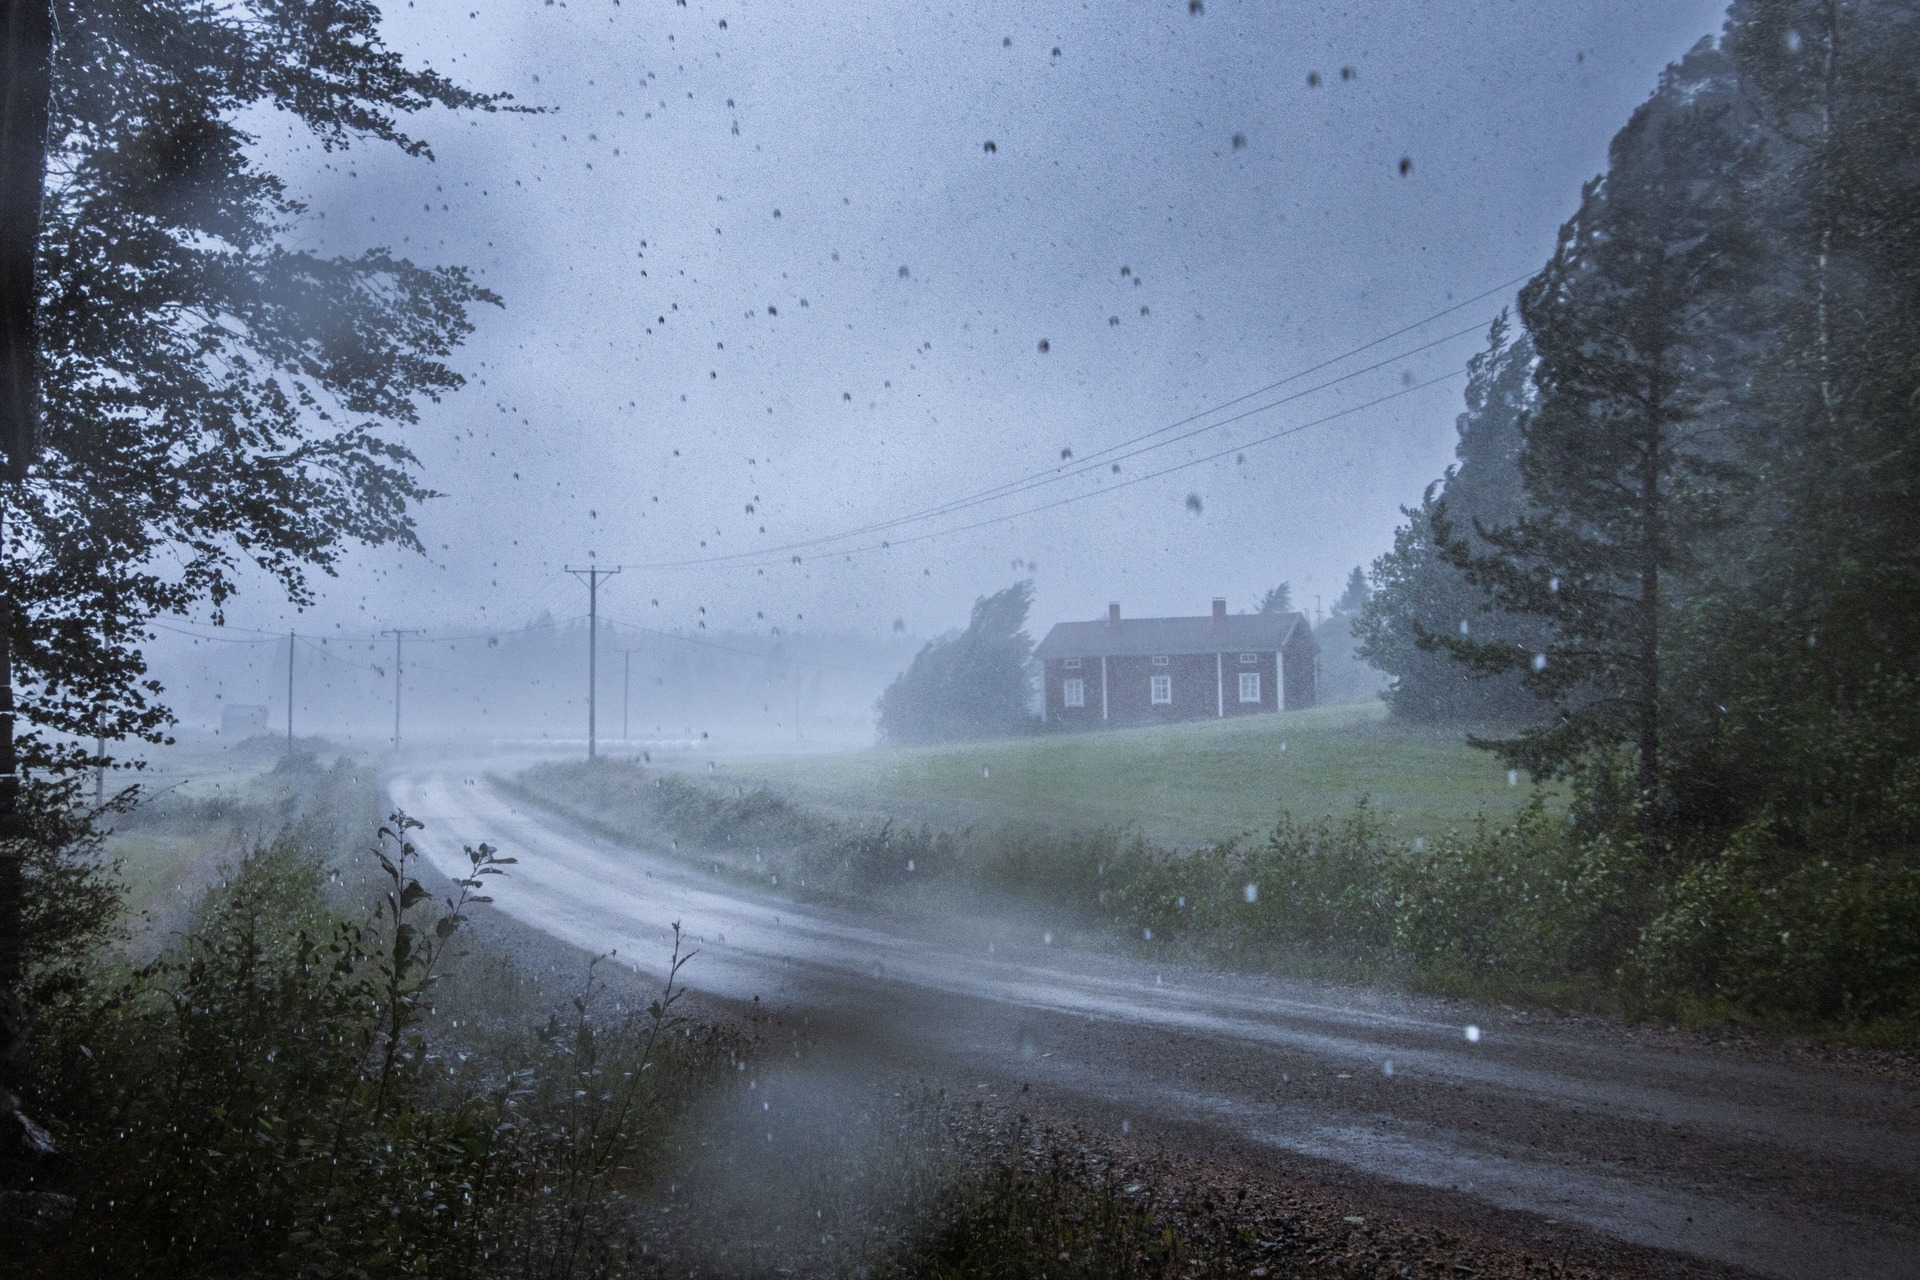 A photo of heavy storm winds